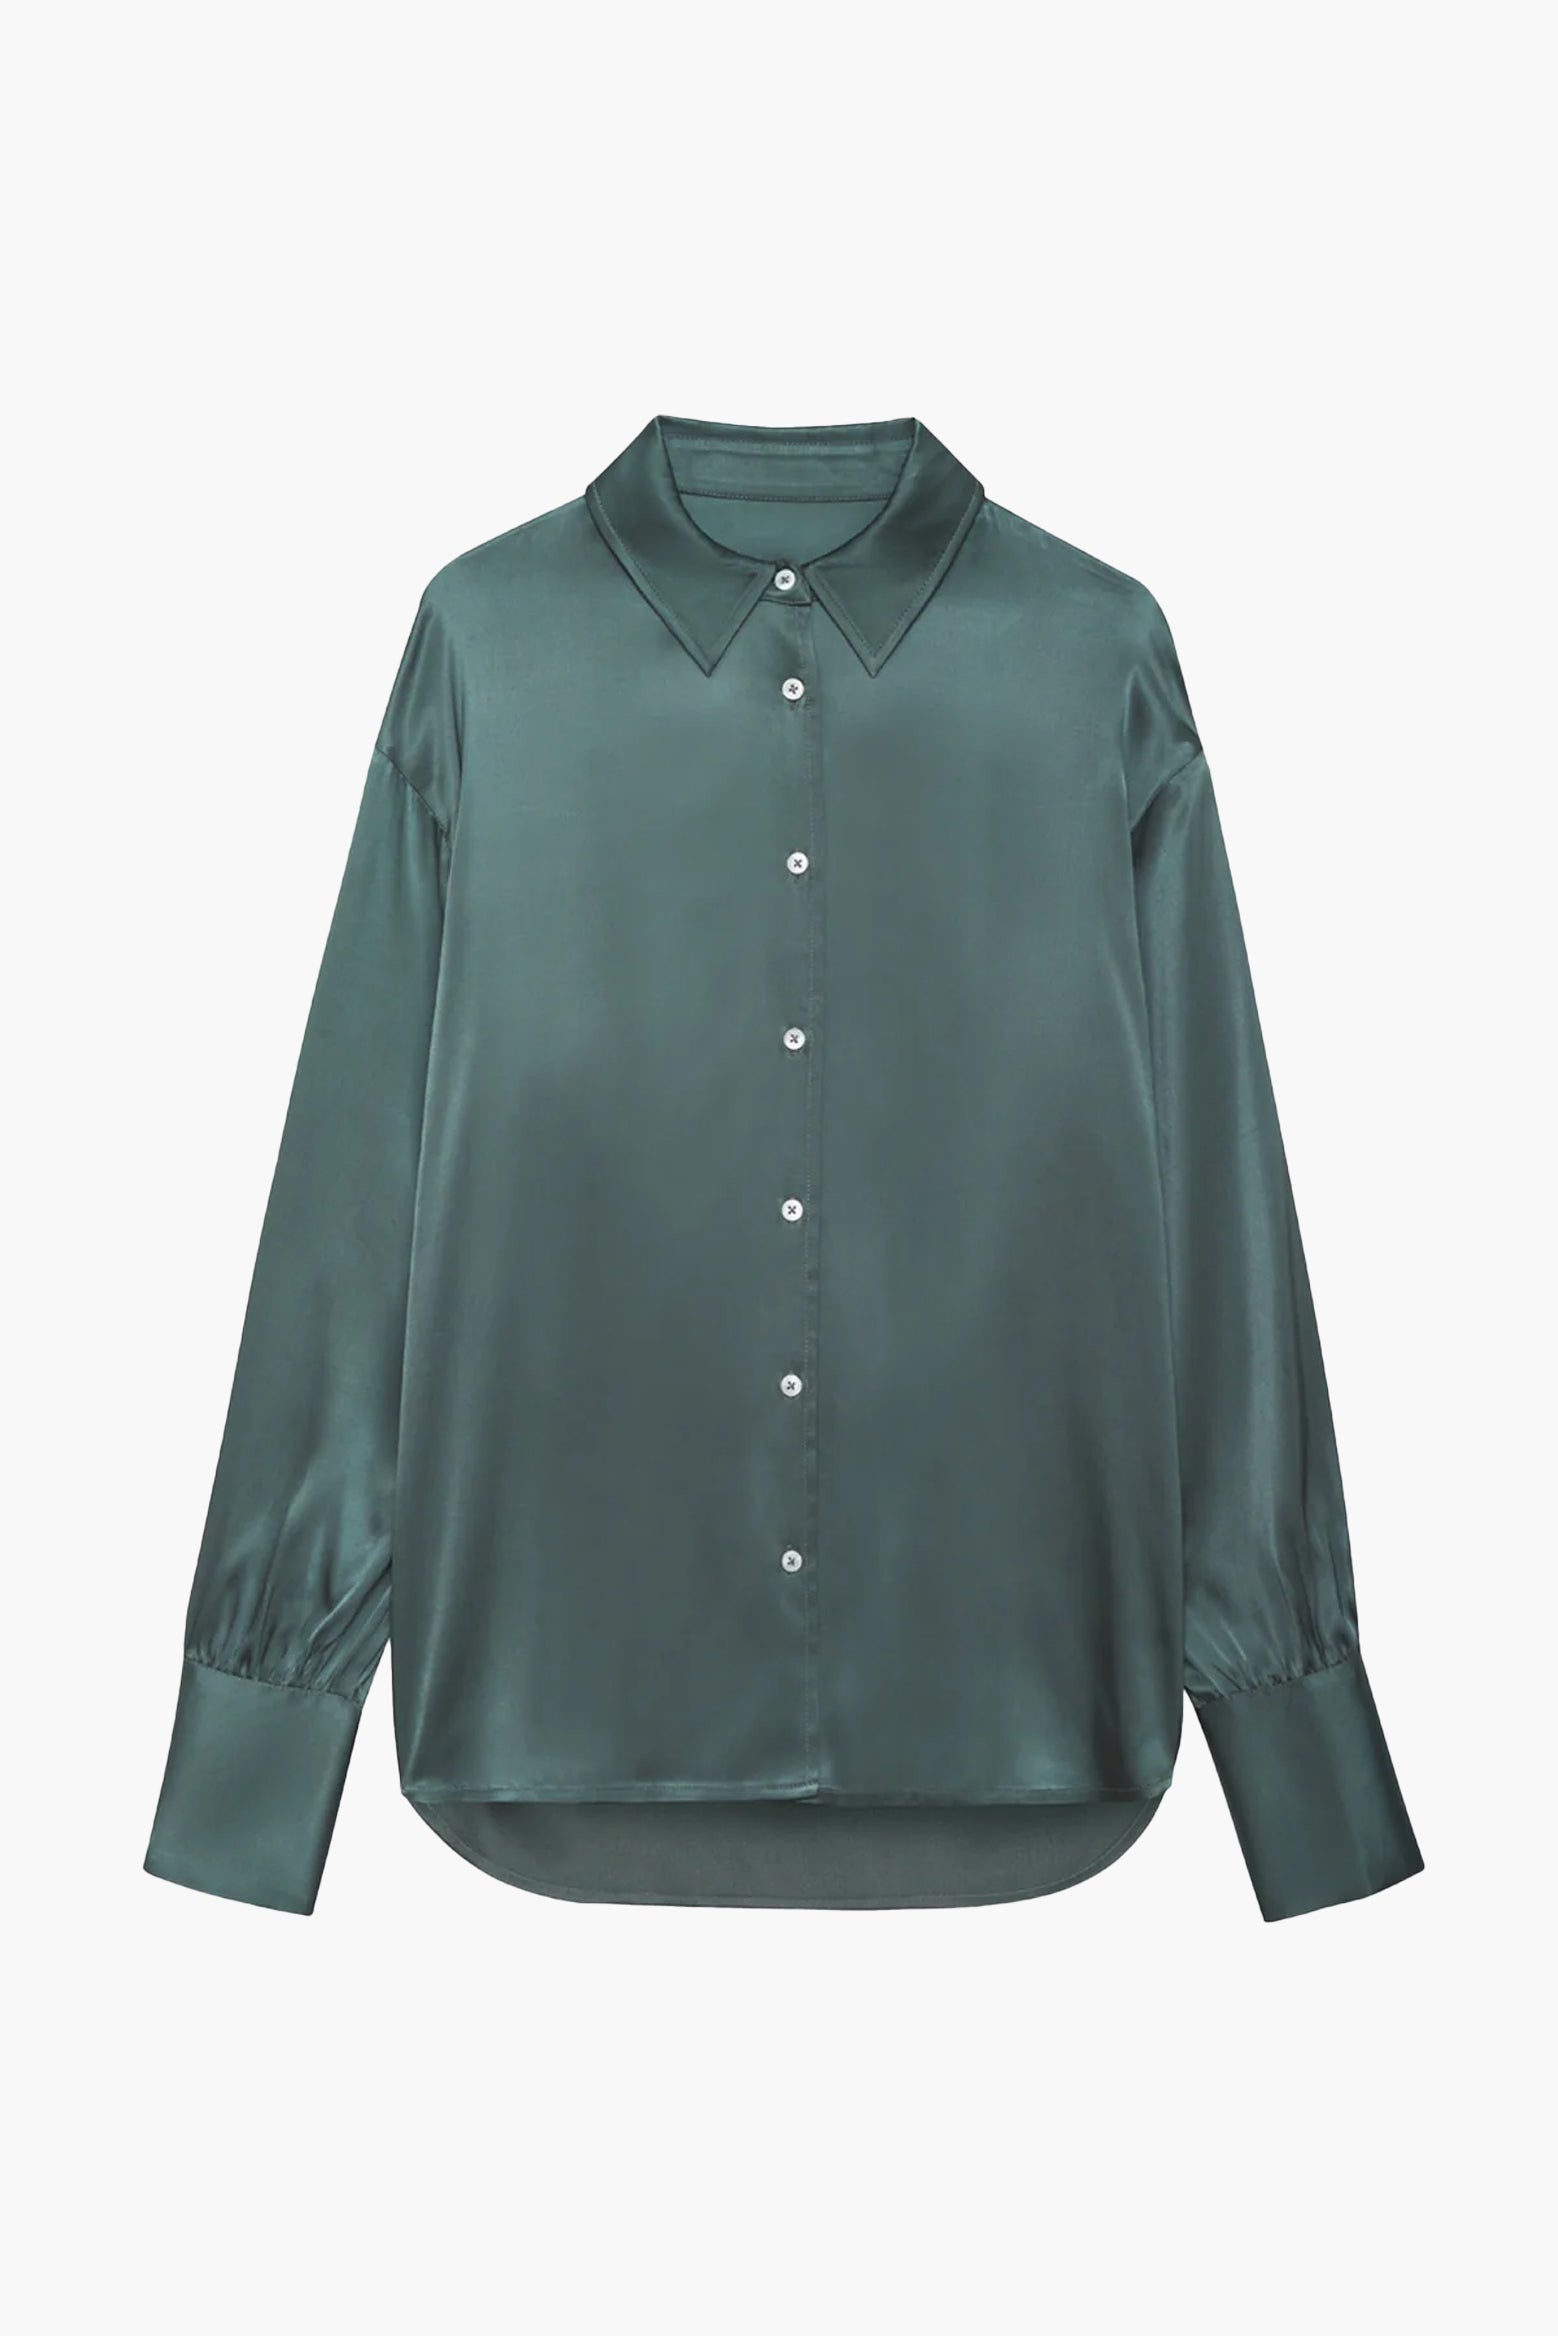 Anine Bing Monica Shirt in Green available at The New Trend Australia. 